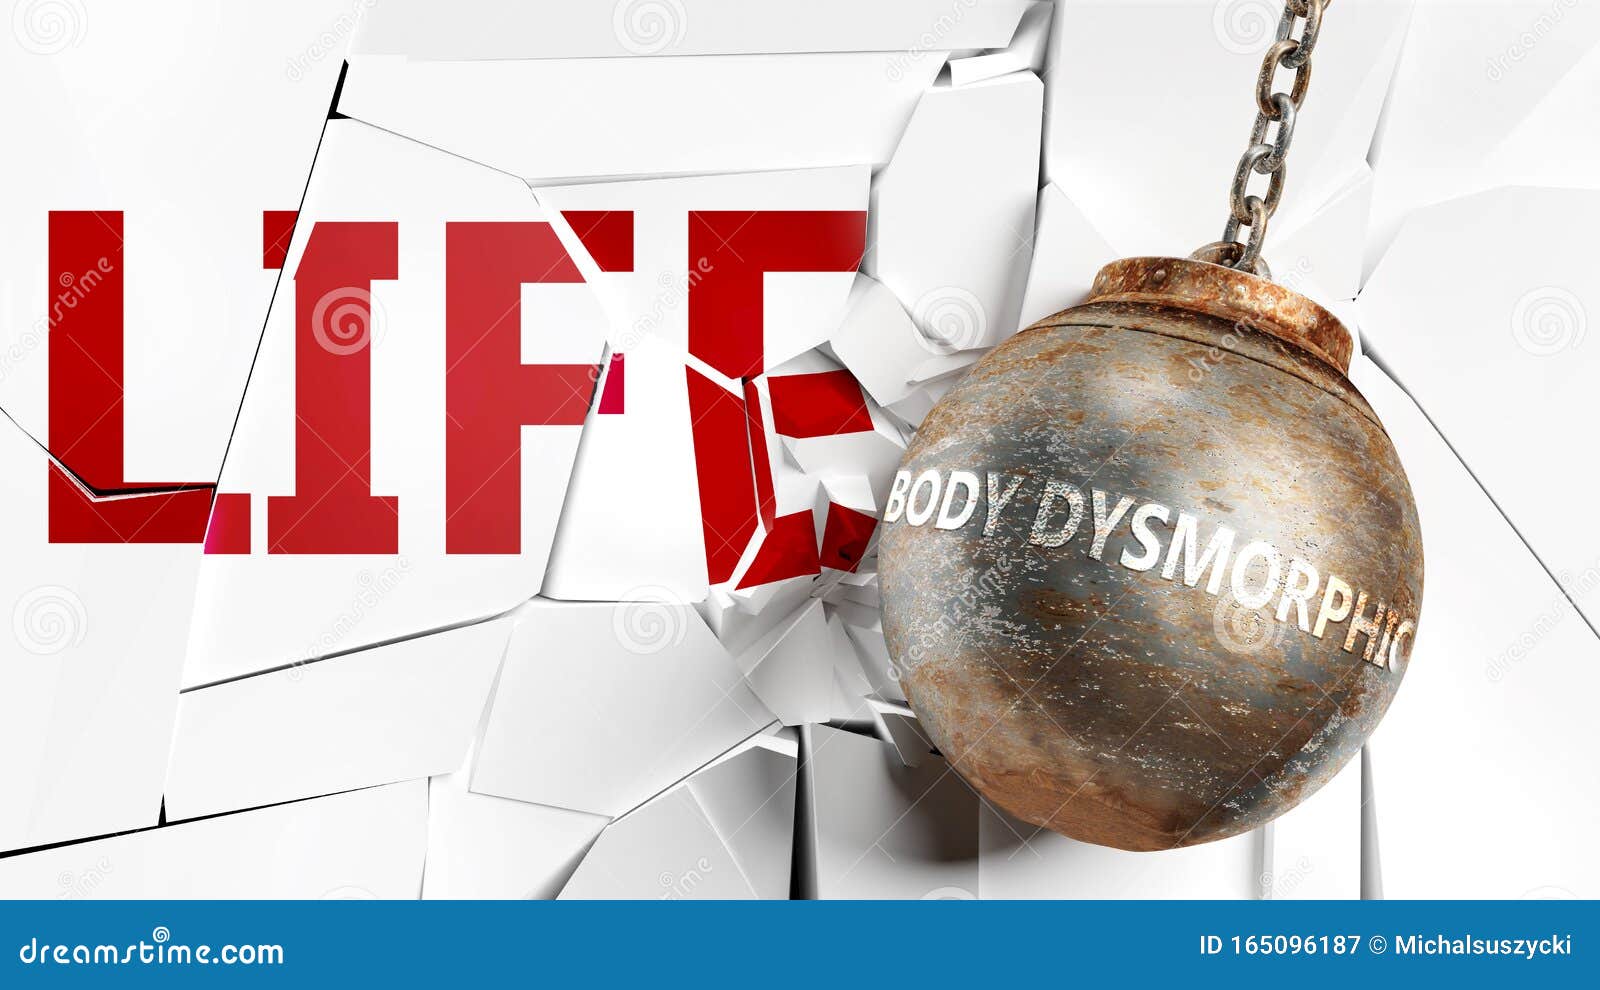 body dysmorphic and life - pictured as a word body dysmorphic and a wreck ball to ize that body dysmorphic can have bad